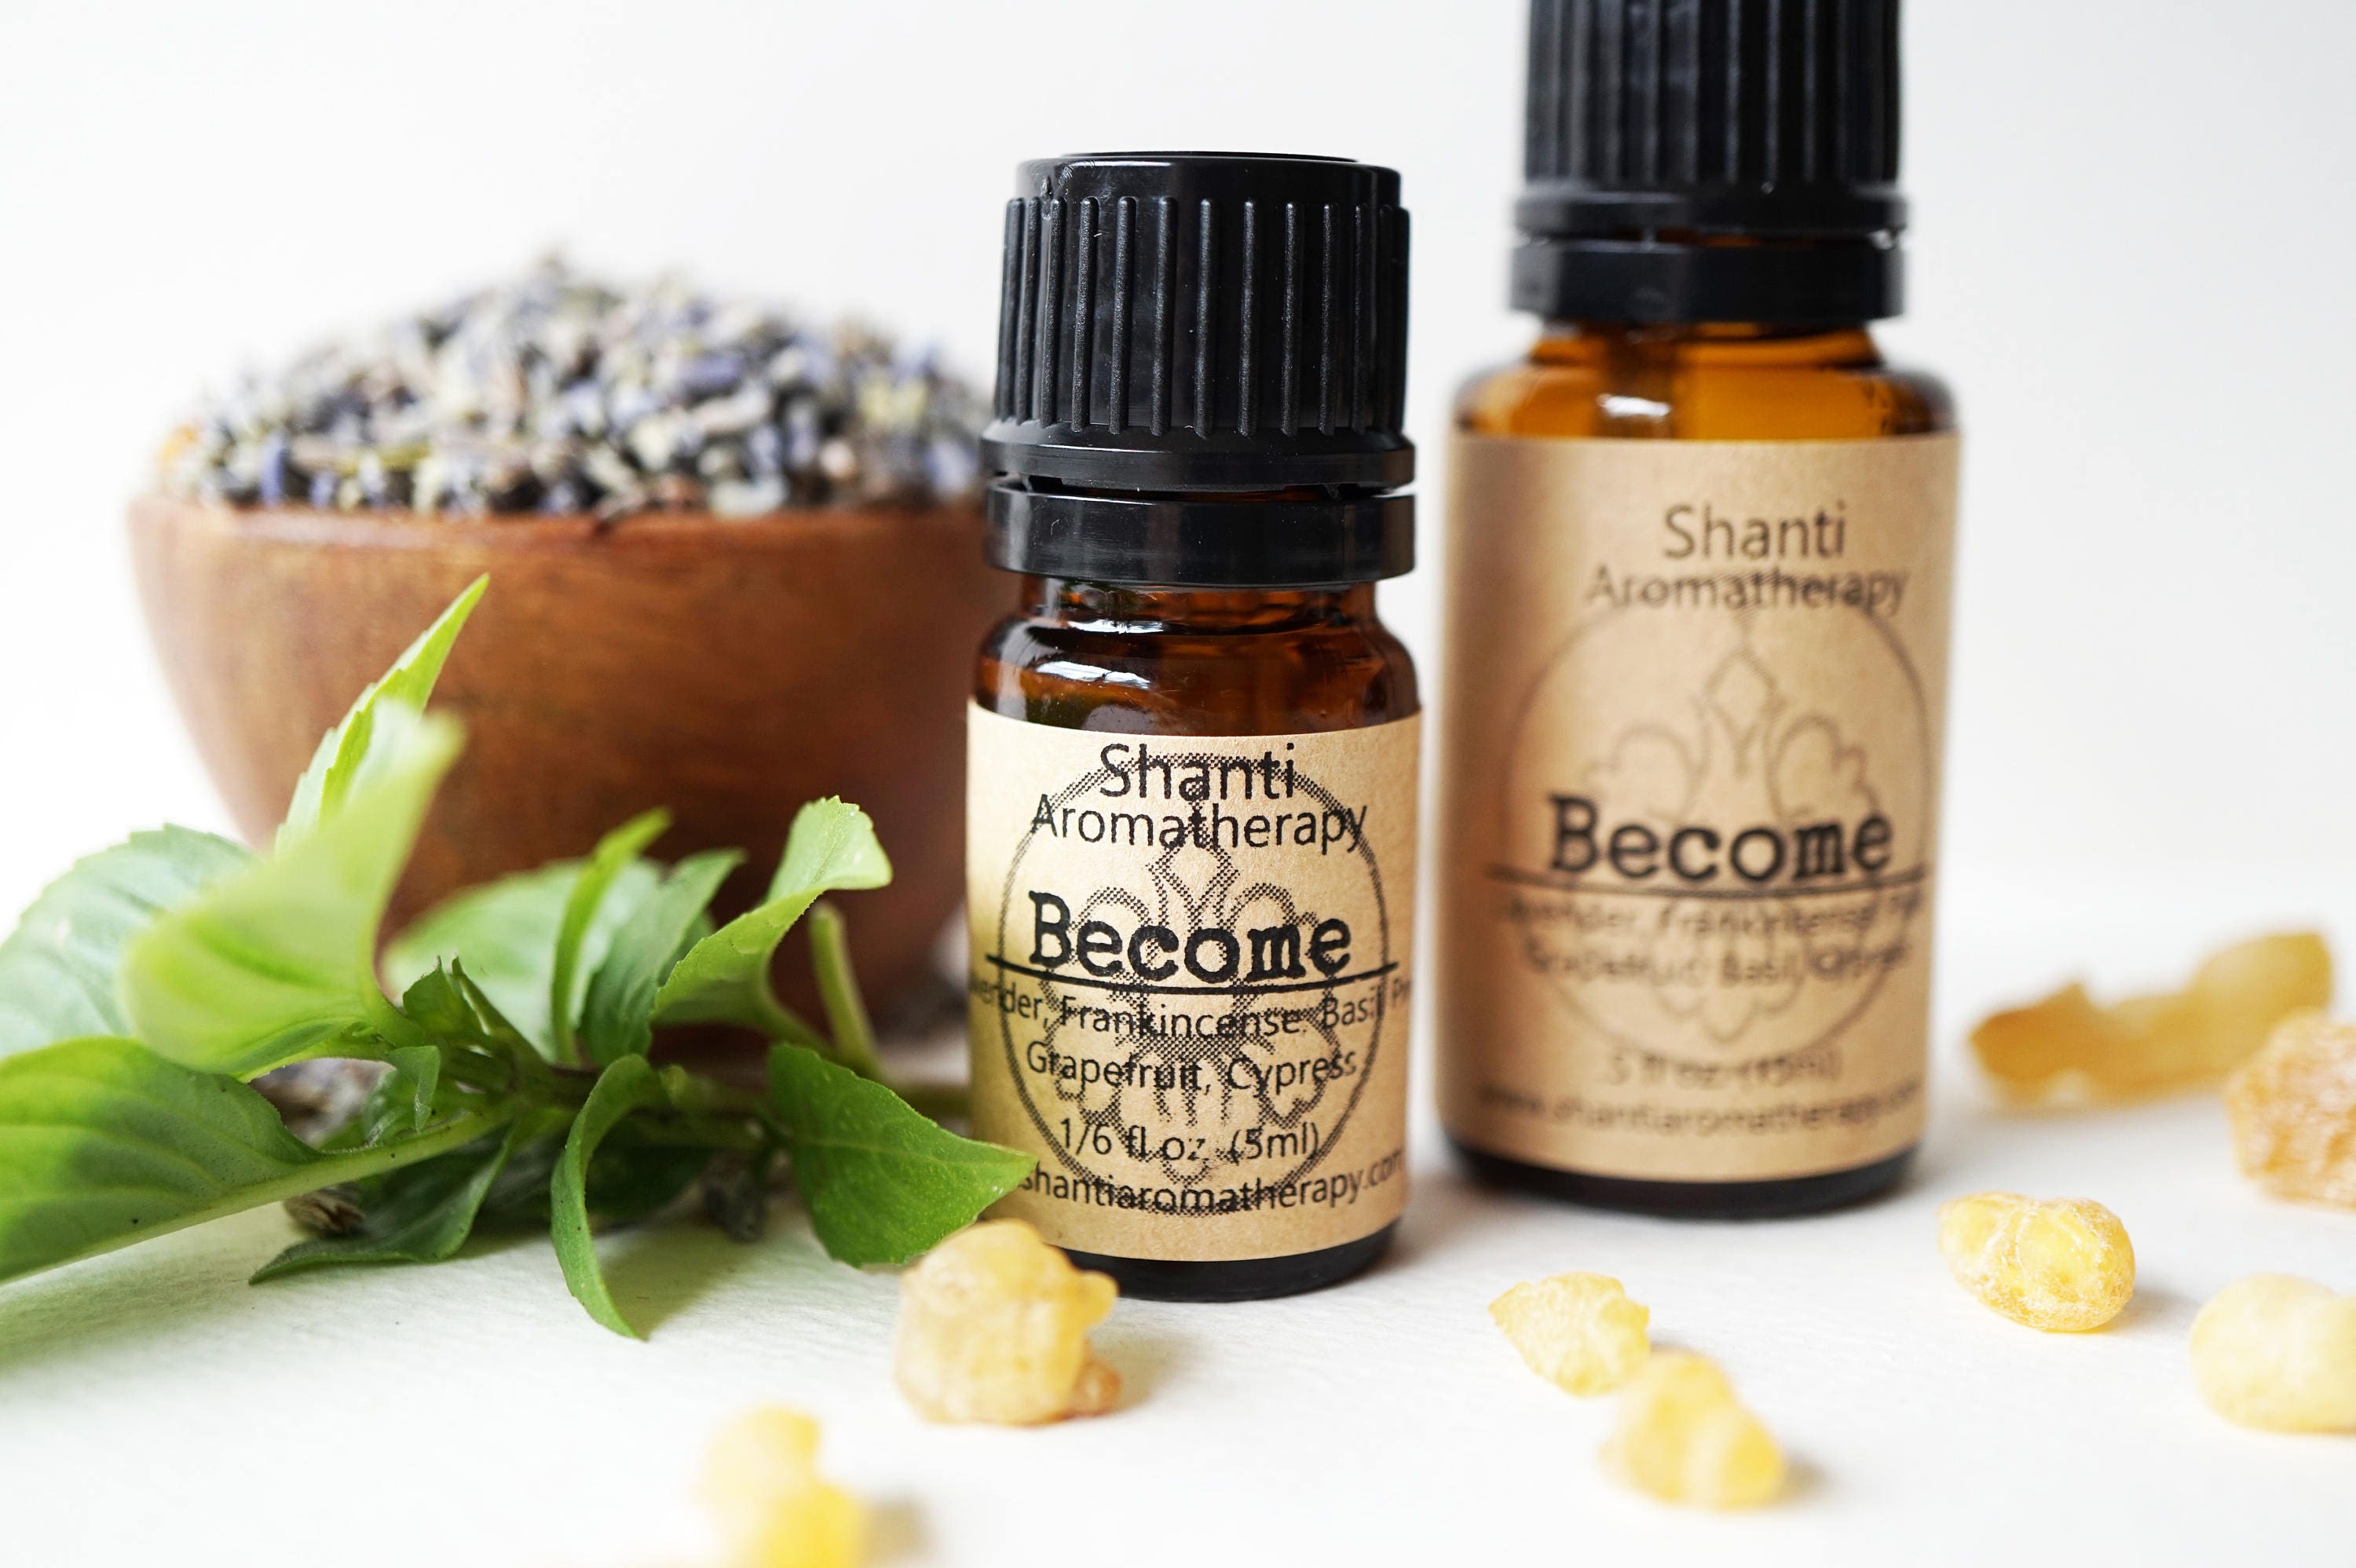 Become Aromatherapy Blend To Stregthen The Spirit - Motivation